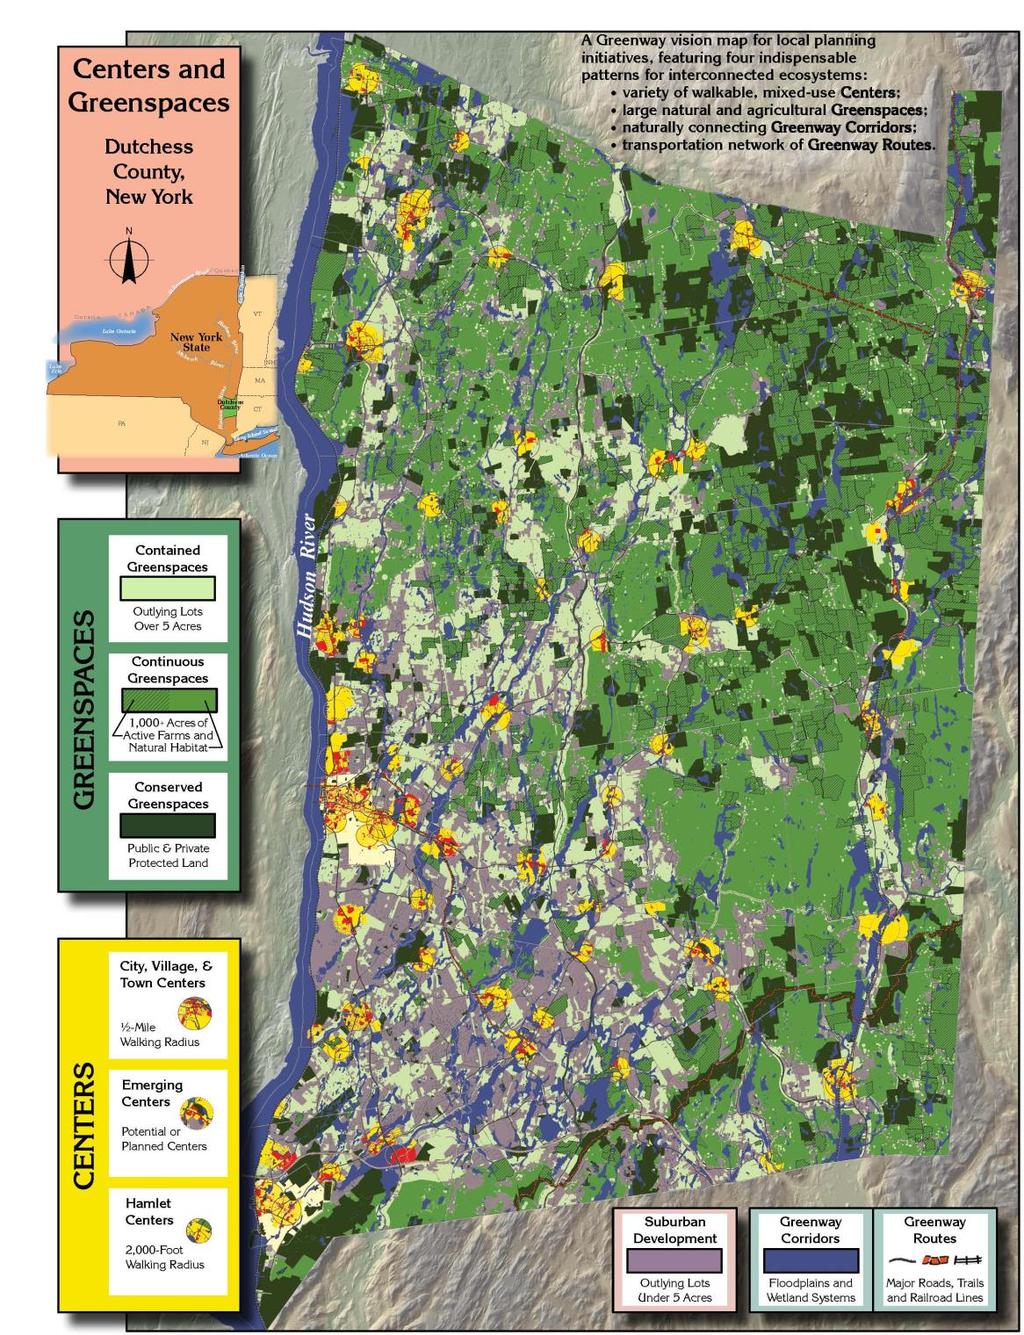 Centers and Greenspaces Countywide Map The Centers and Greenspaces Map is designed as a Greenway vision map to be used for larger scale studies across multiple municipalities and so that local plans